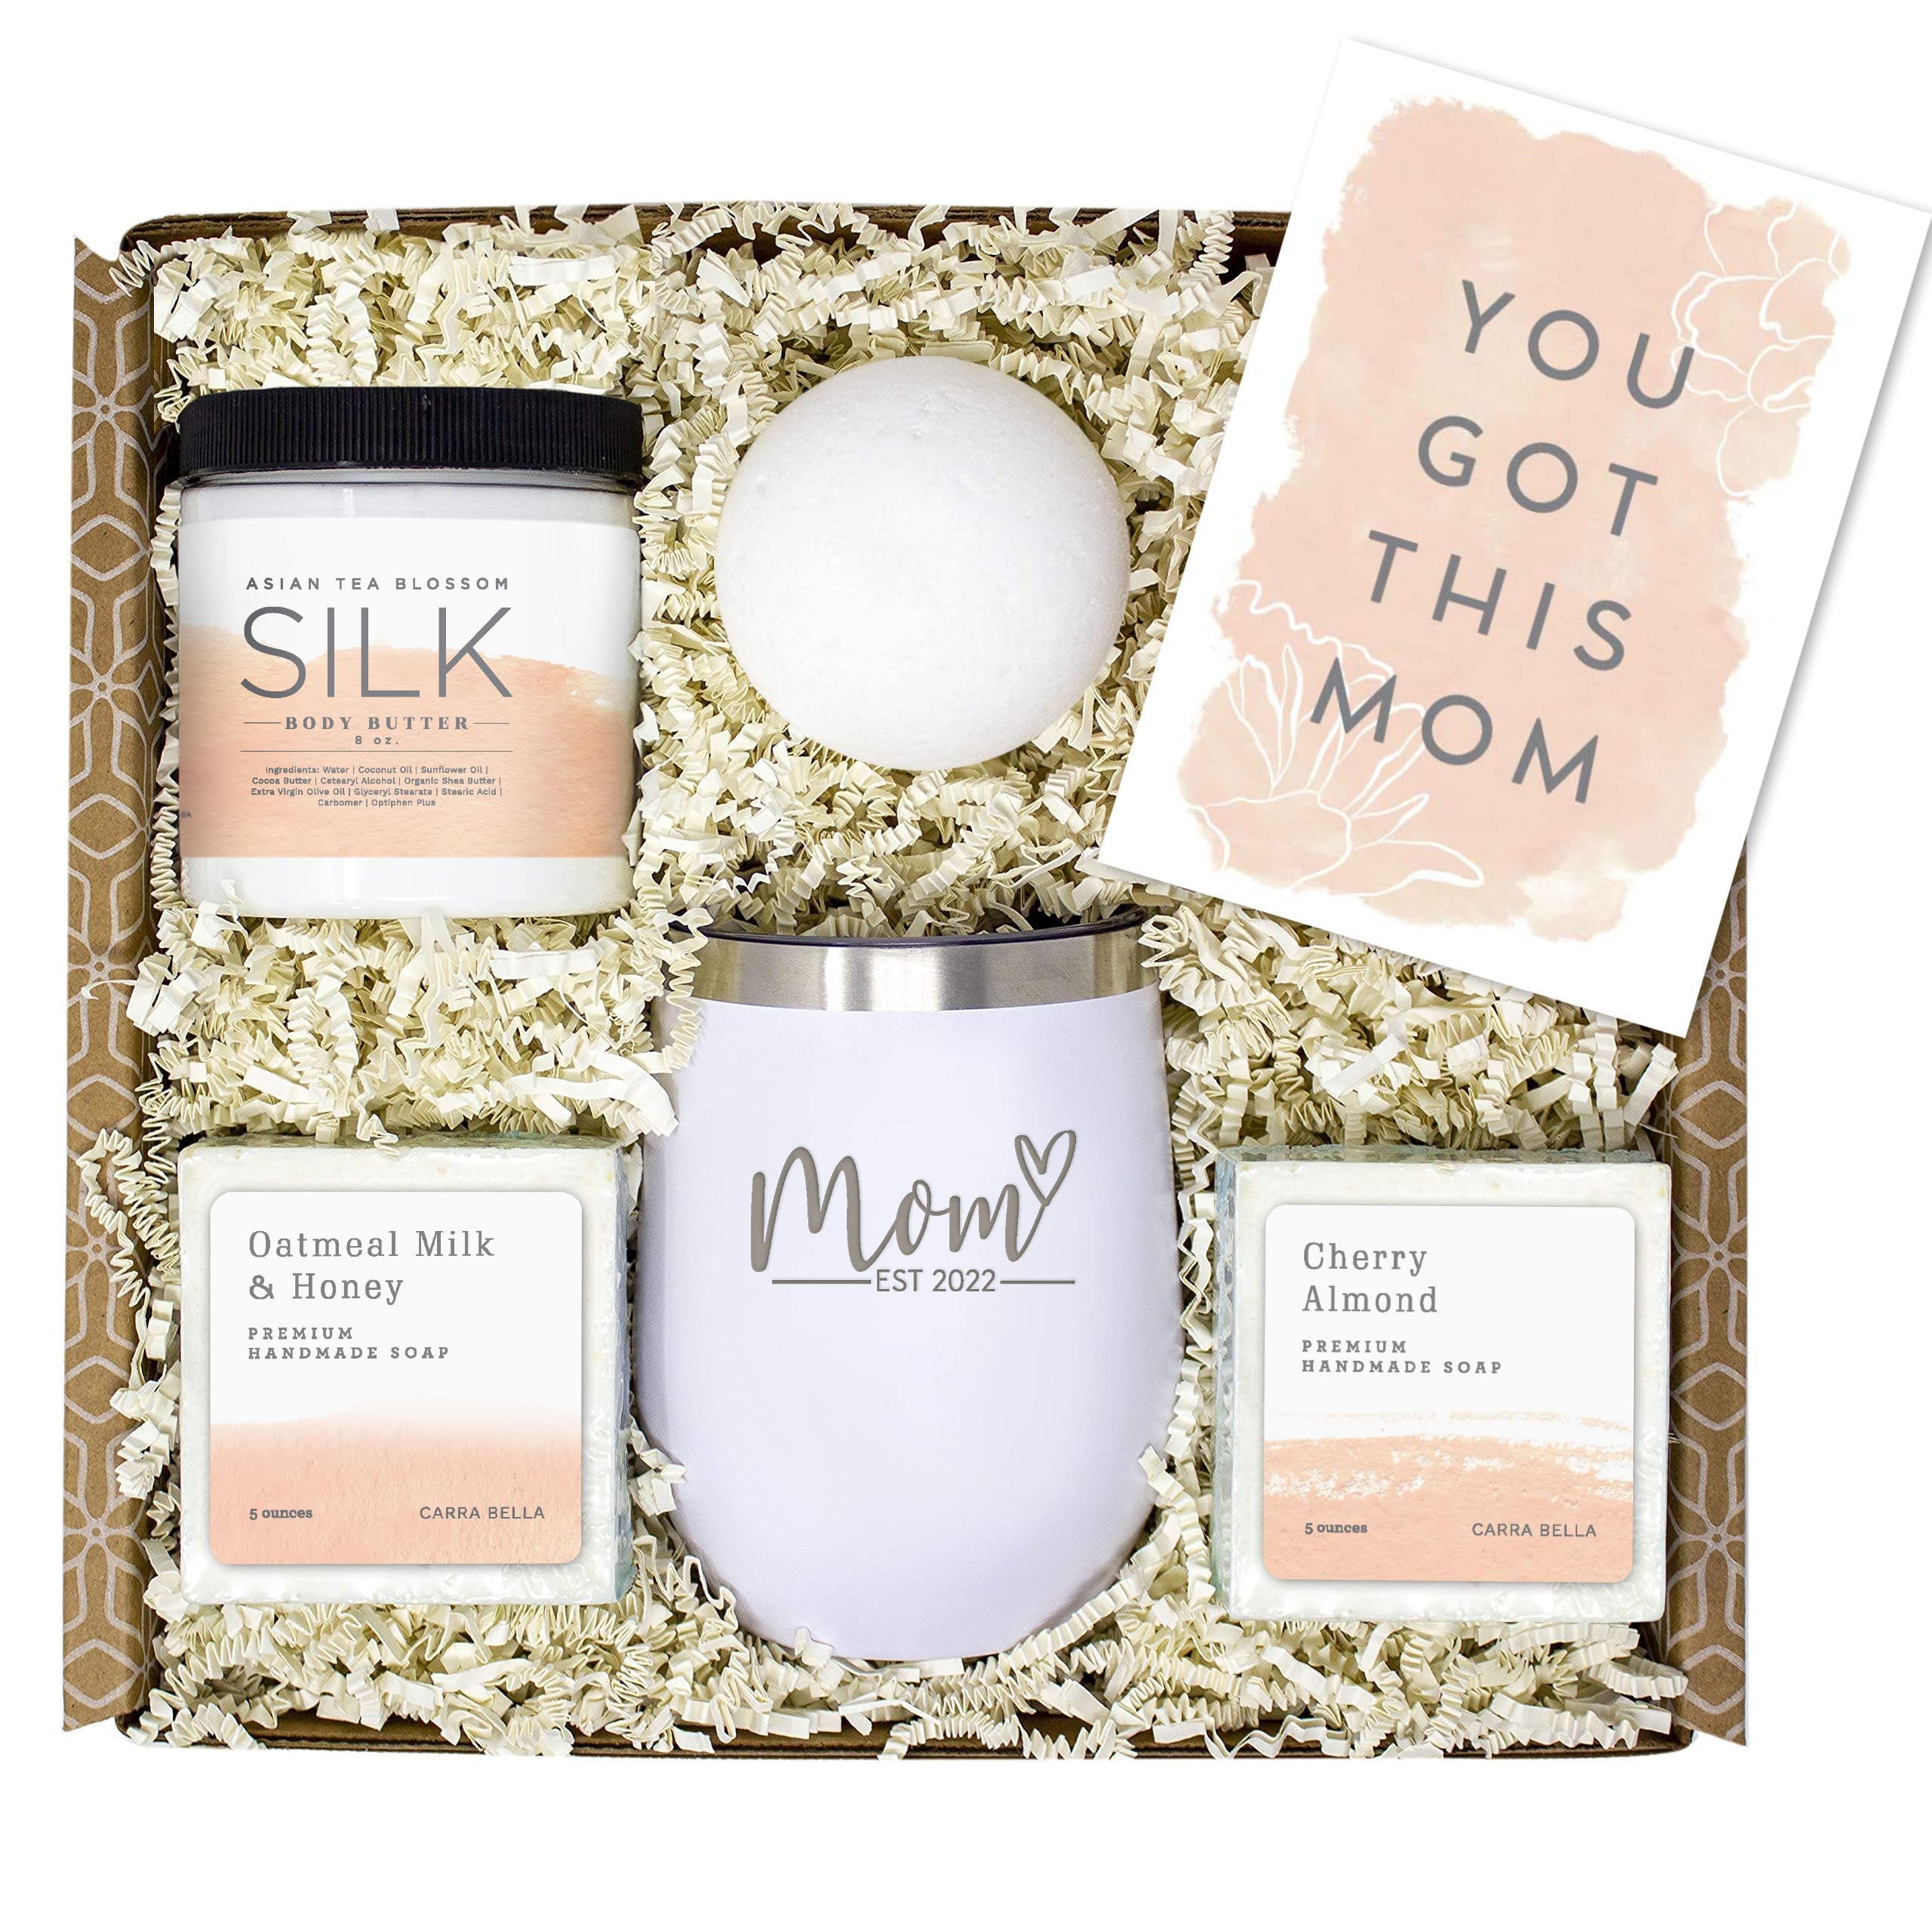  New Mom Gifts for Women - Mom Est 2023 Spa Gifts Box for Women  with 12 oz Seaside Tumbler - Mothers Day Gifts Self Care Kit Relaxing Gifts  for New